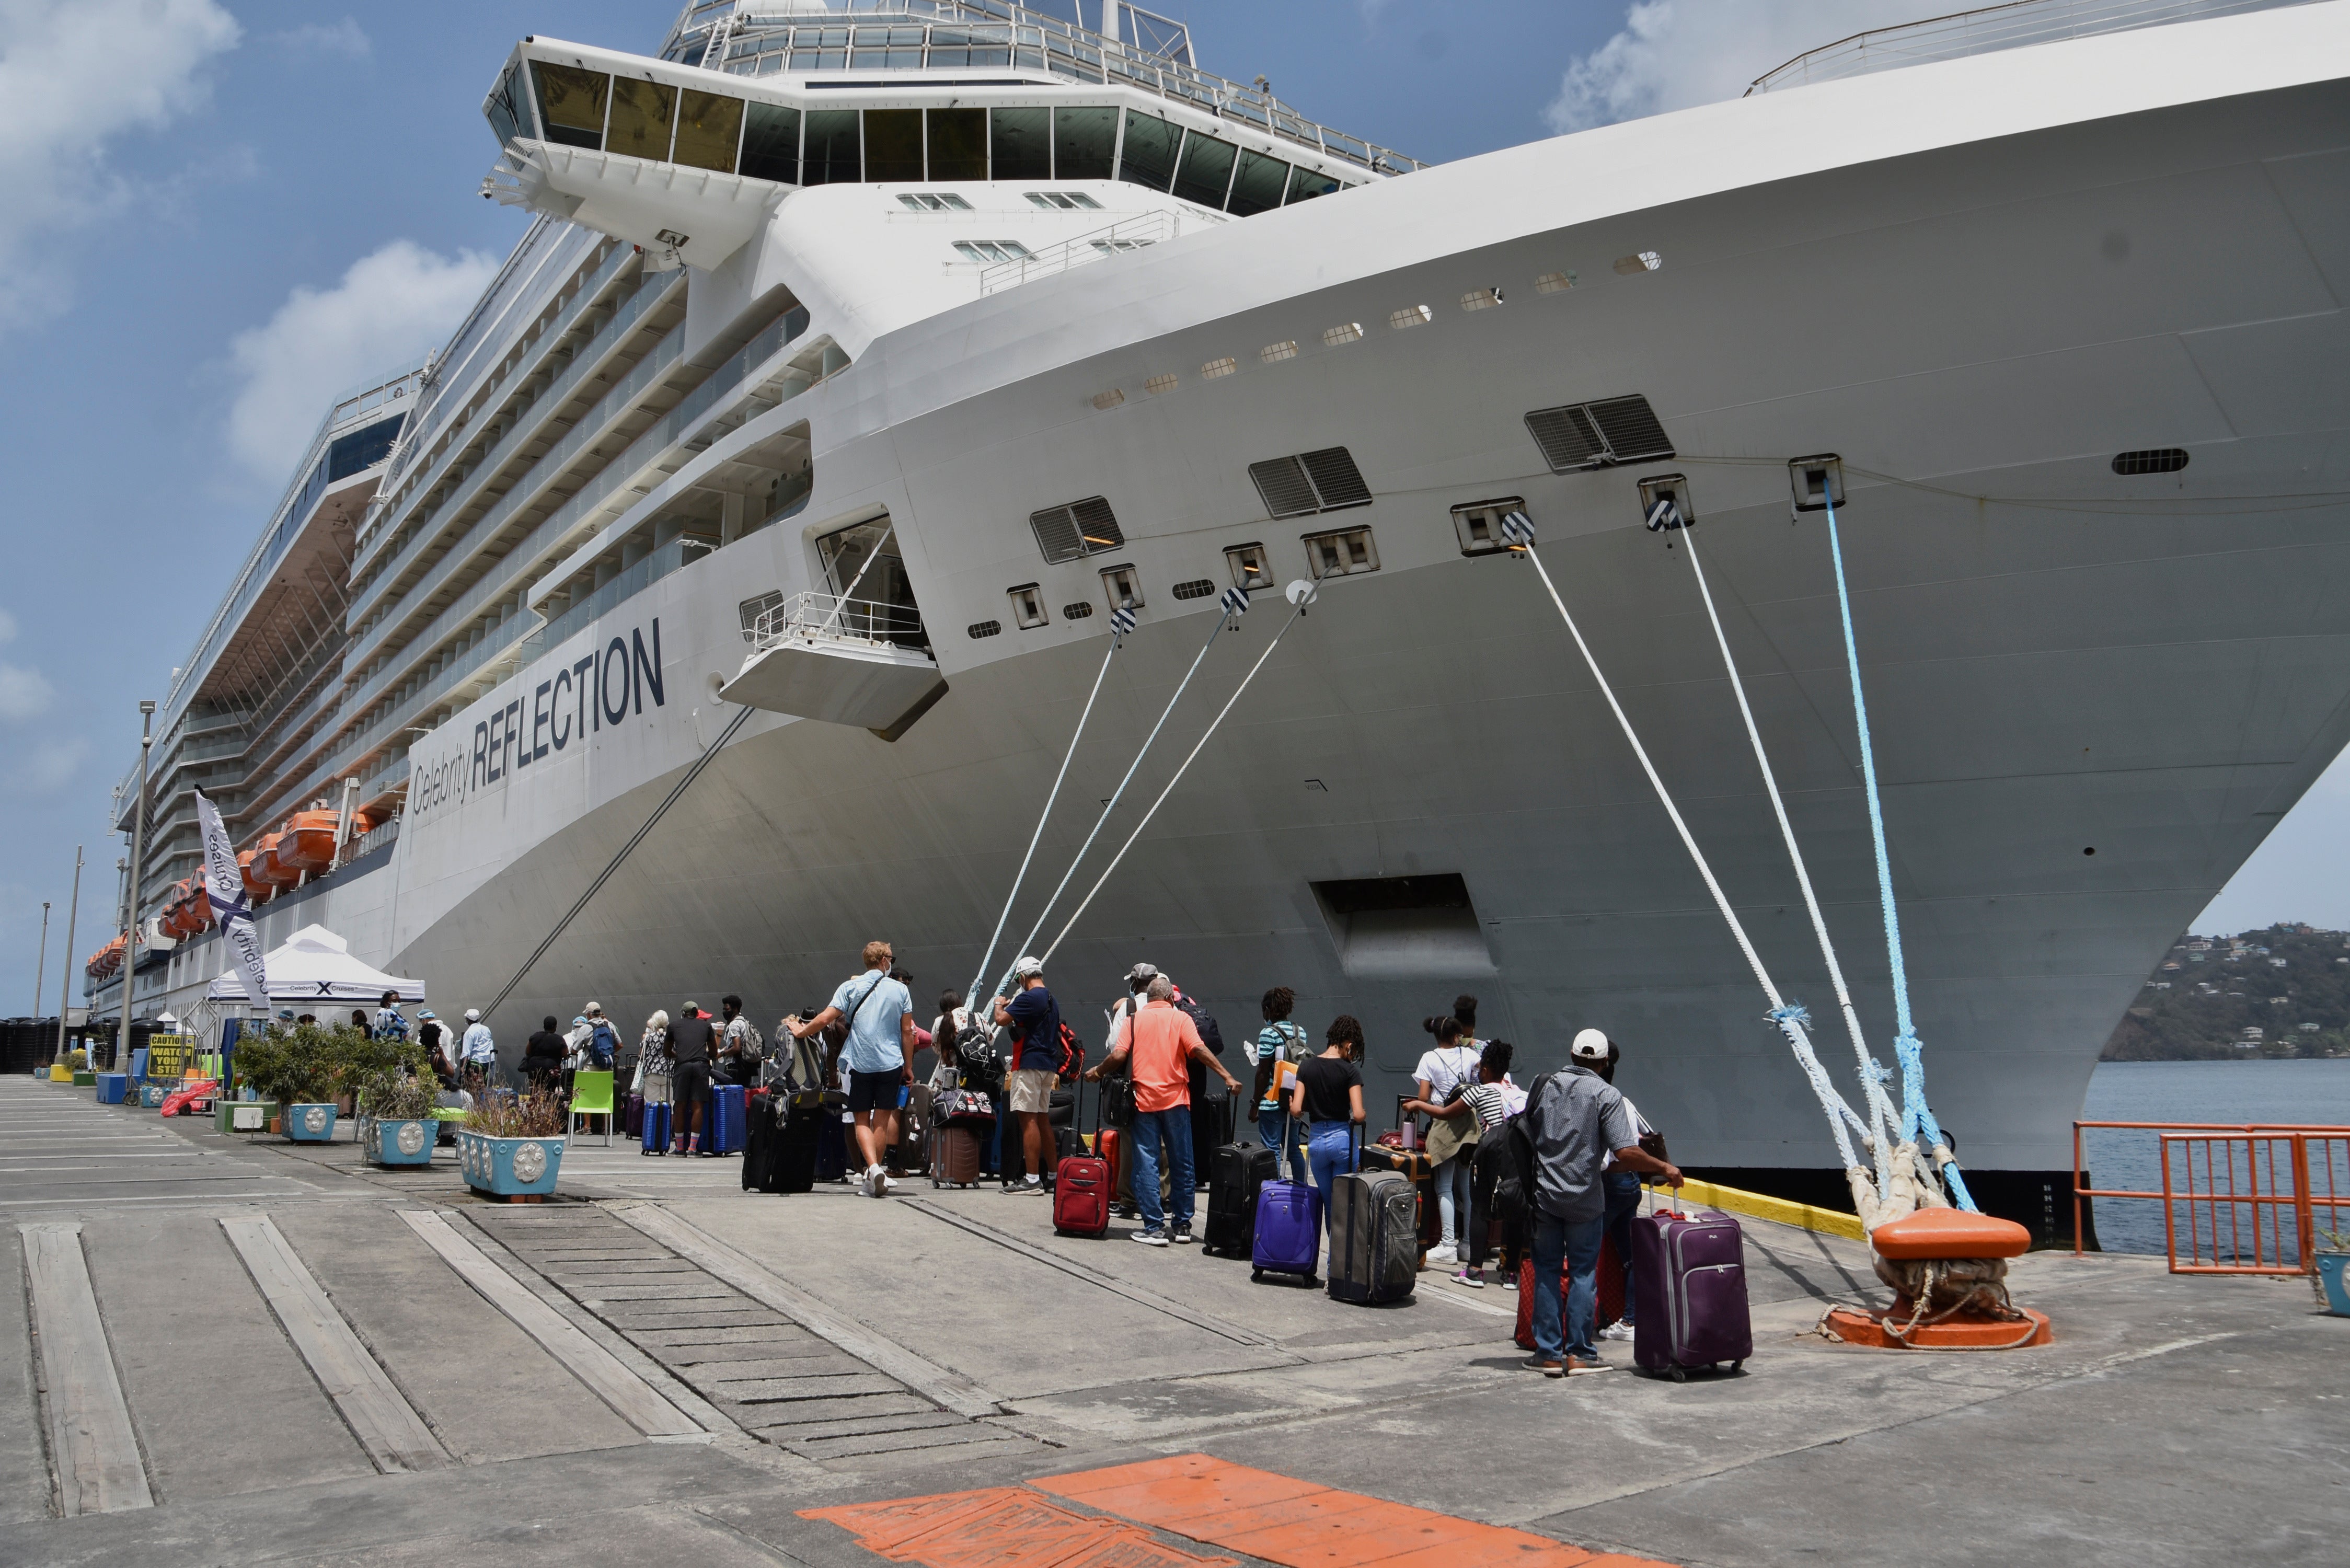 Royal Caribbean sends ships to St. Vincent to assist with evacuations amid La Soufriere eruption